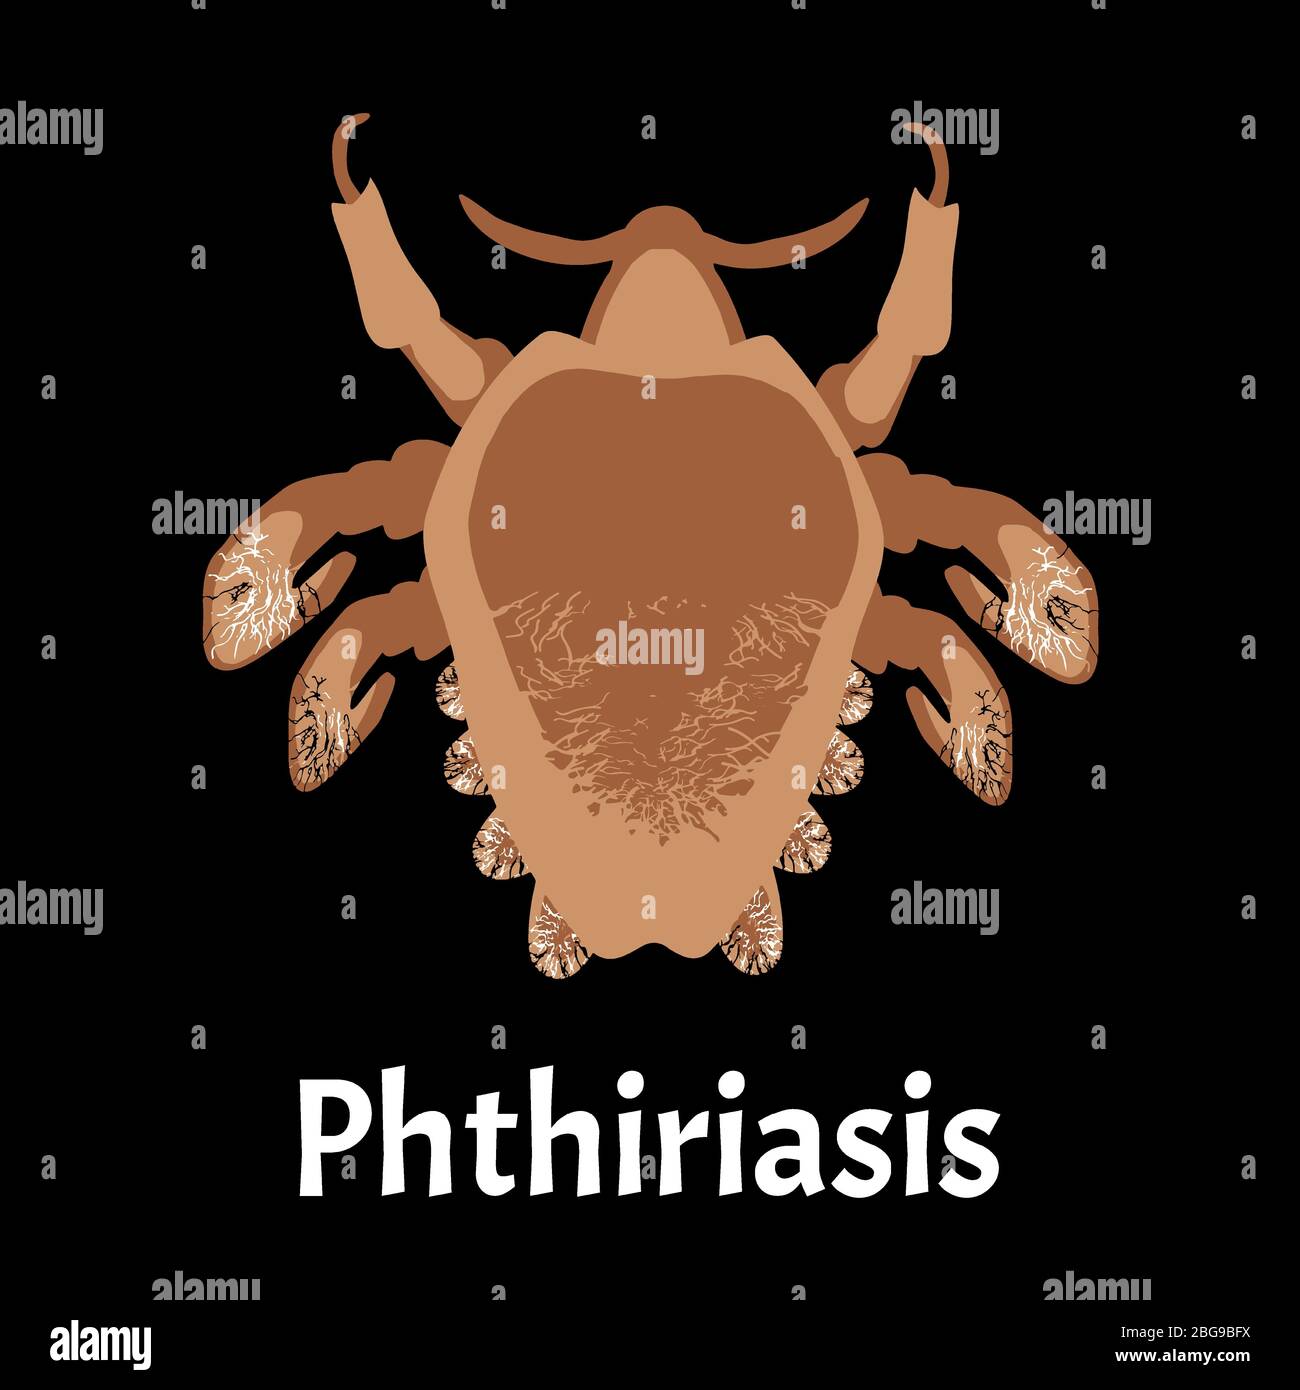 Parasitic diseases of Phthiriasis. Pediculosis pubis. Pubic lice structure. Sexually transmitted diseases. Infographics. Vector illustration on Stock Vector